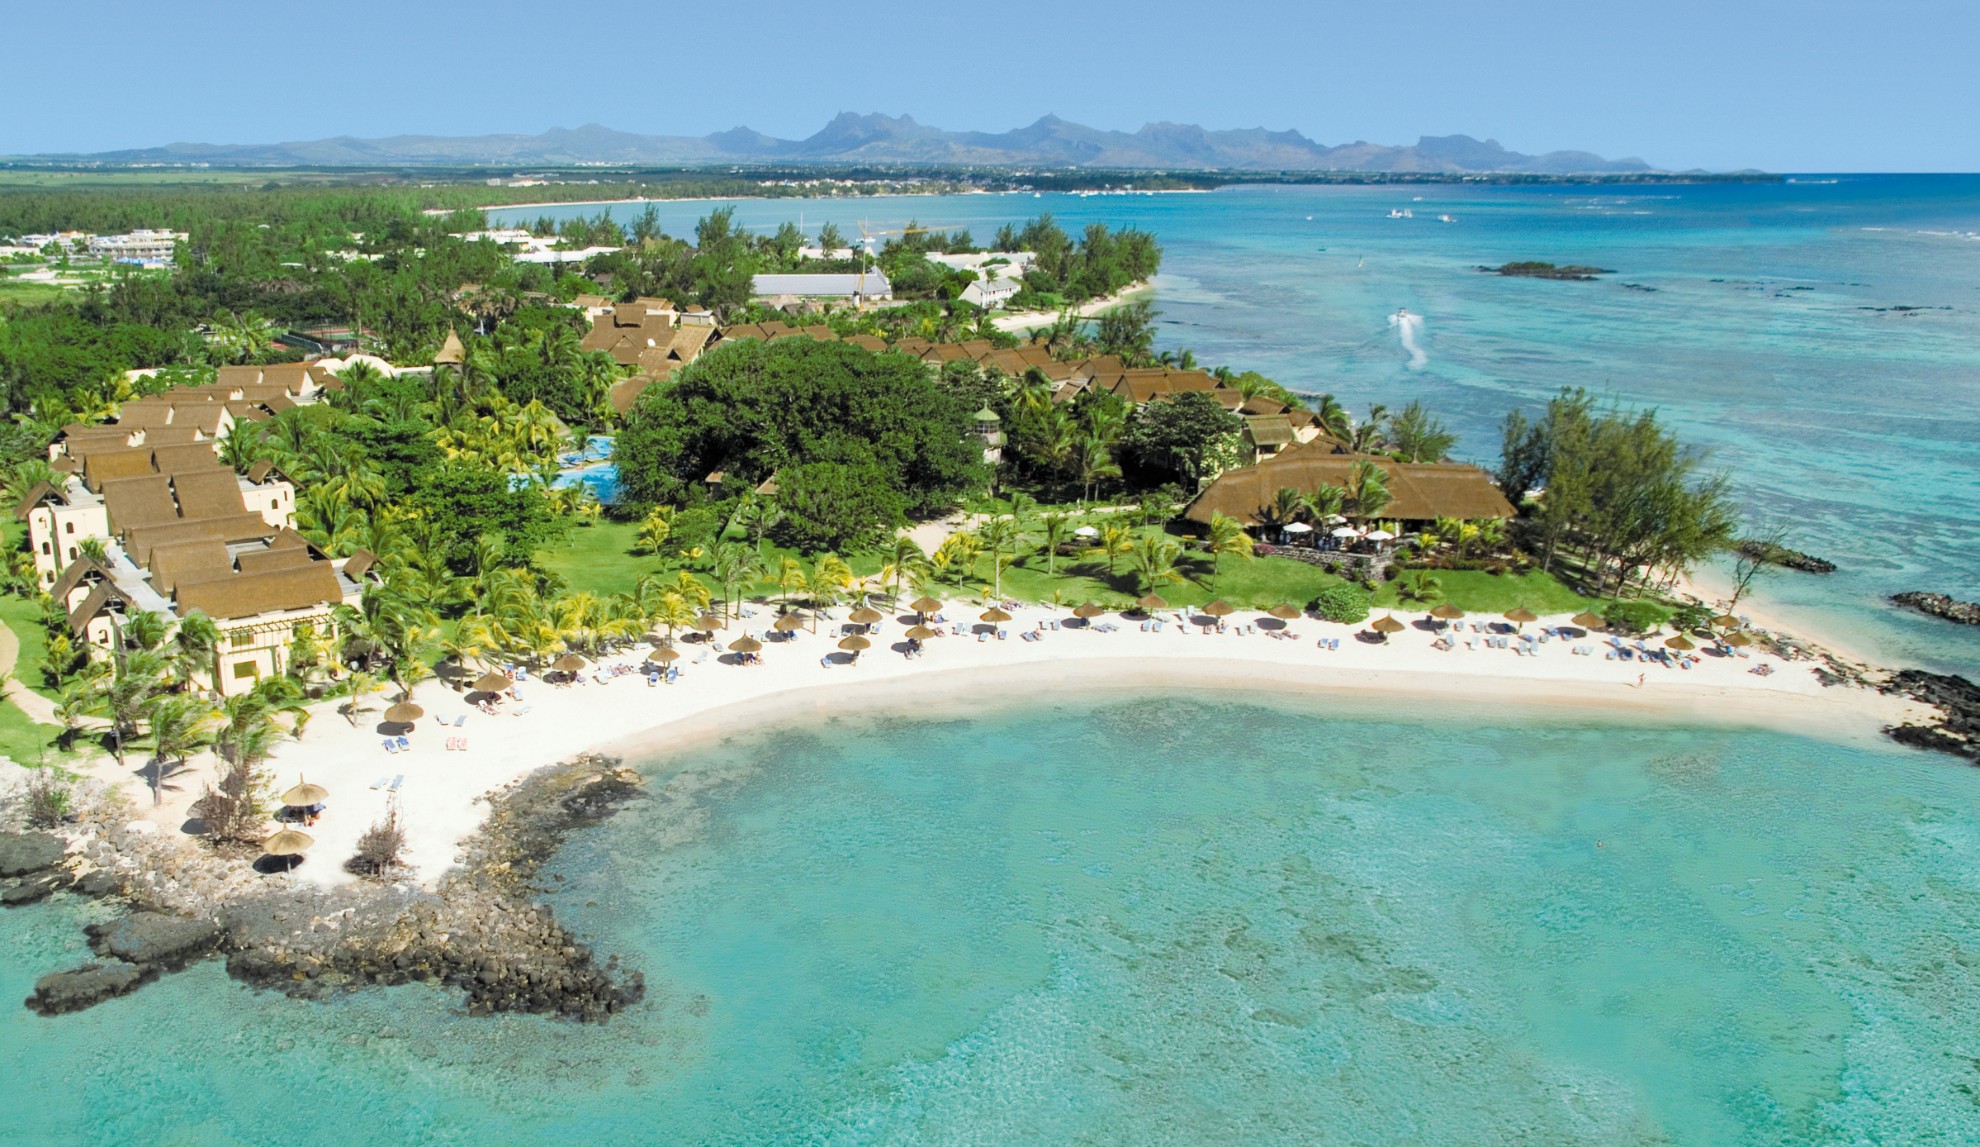 Canonnier Beachcomber Golf Resort & Spa Mauritius from above